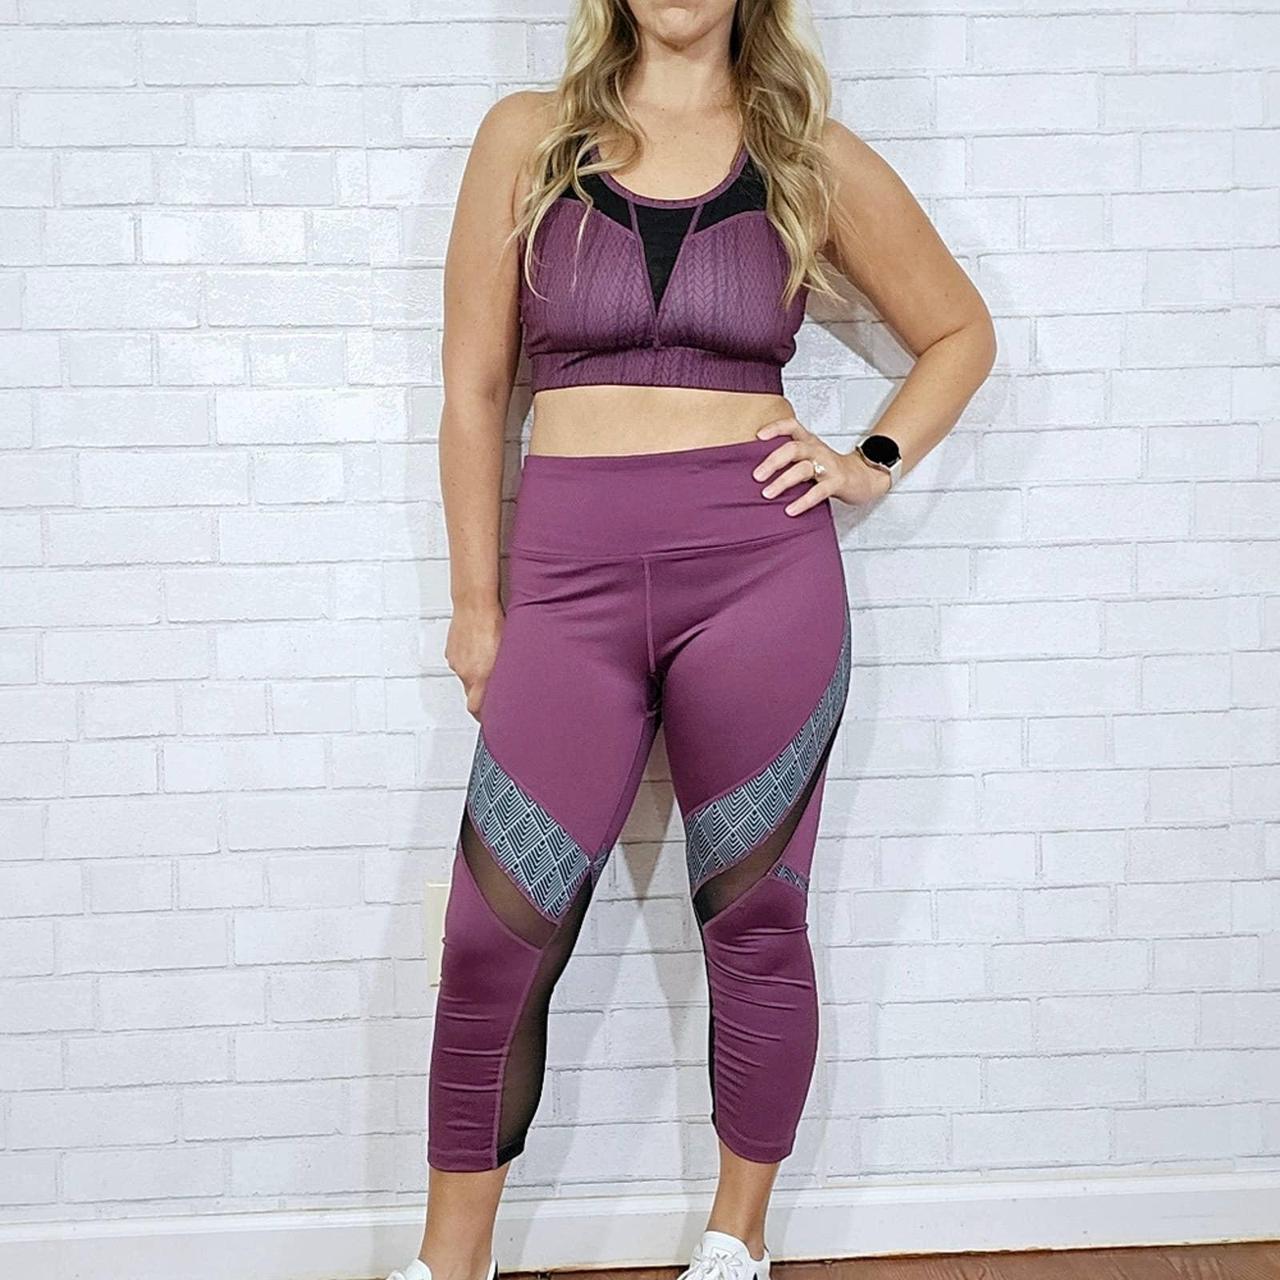 Matching sports bra and legging set from Fit2Run.